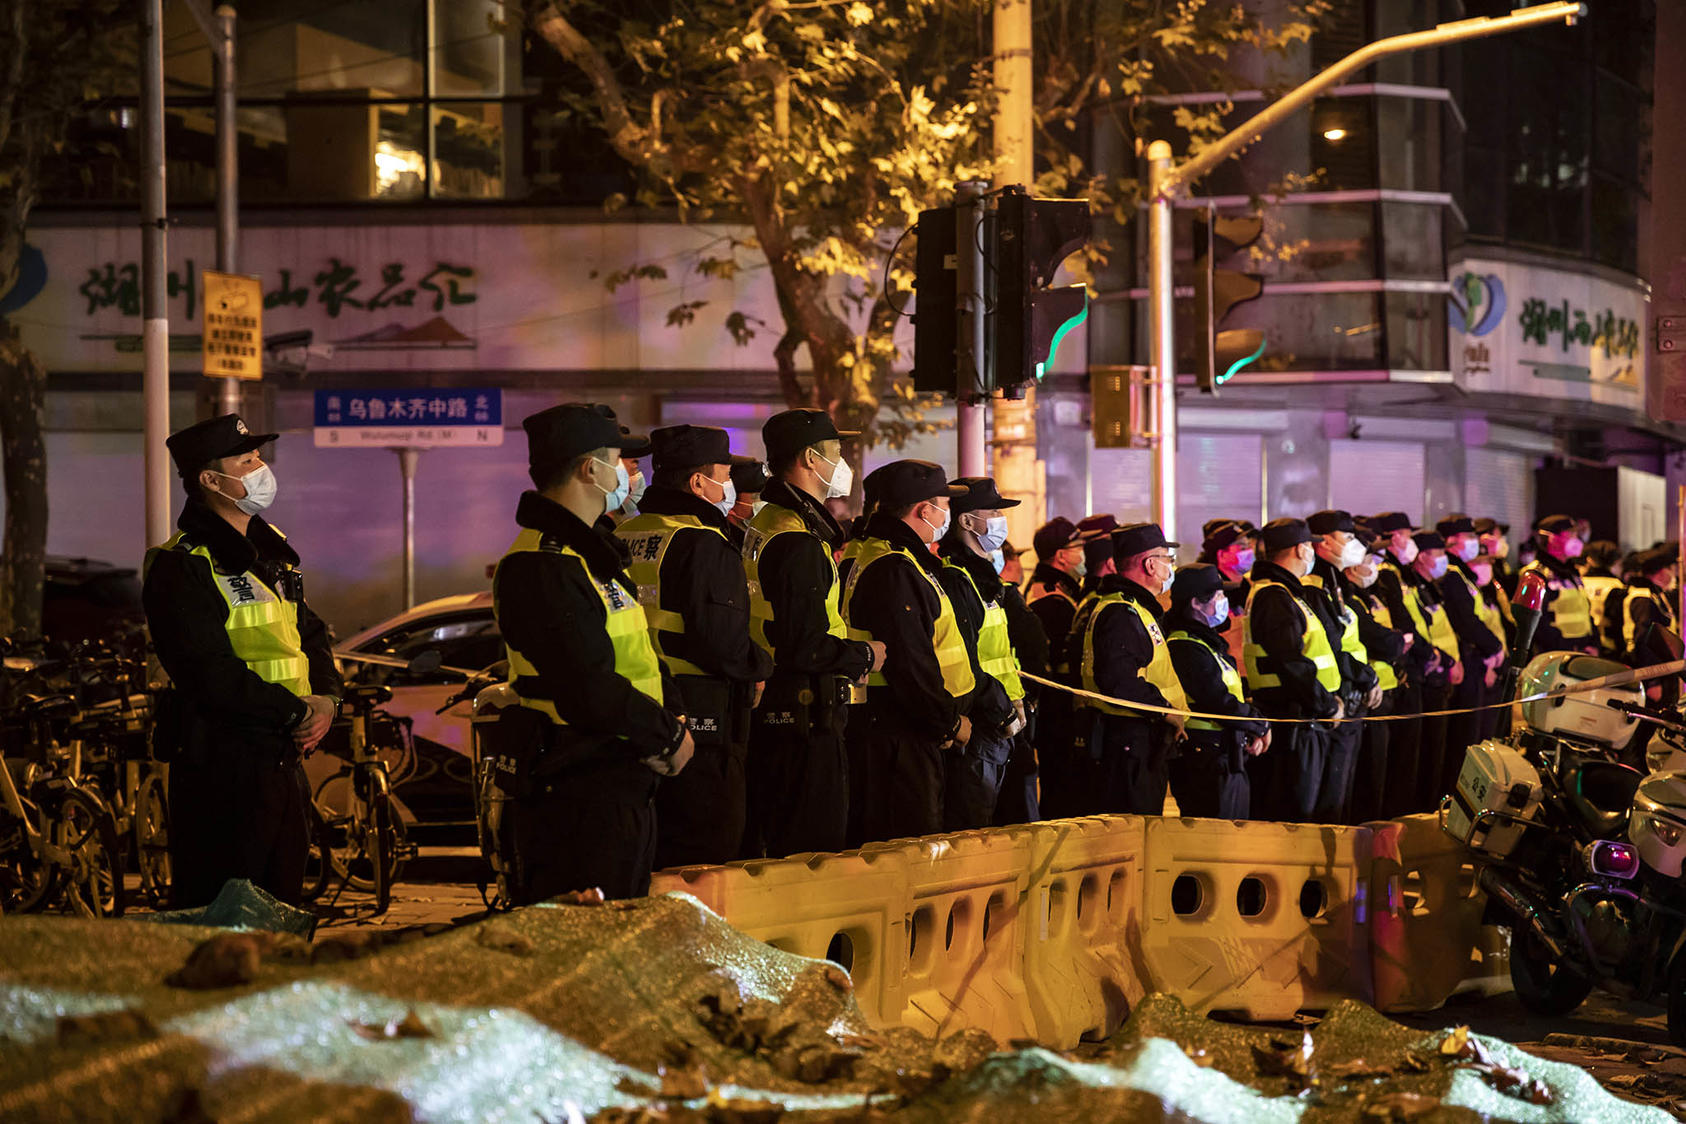 Police officers block a street where protests had taken place the night before, in Shanghai China, on Sunday, Nov. 27, 2022. (The New York Times)